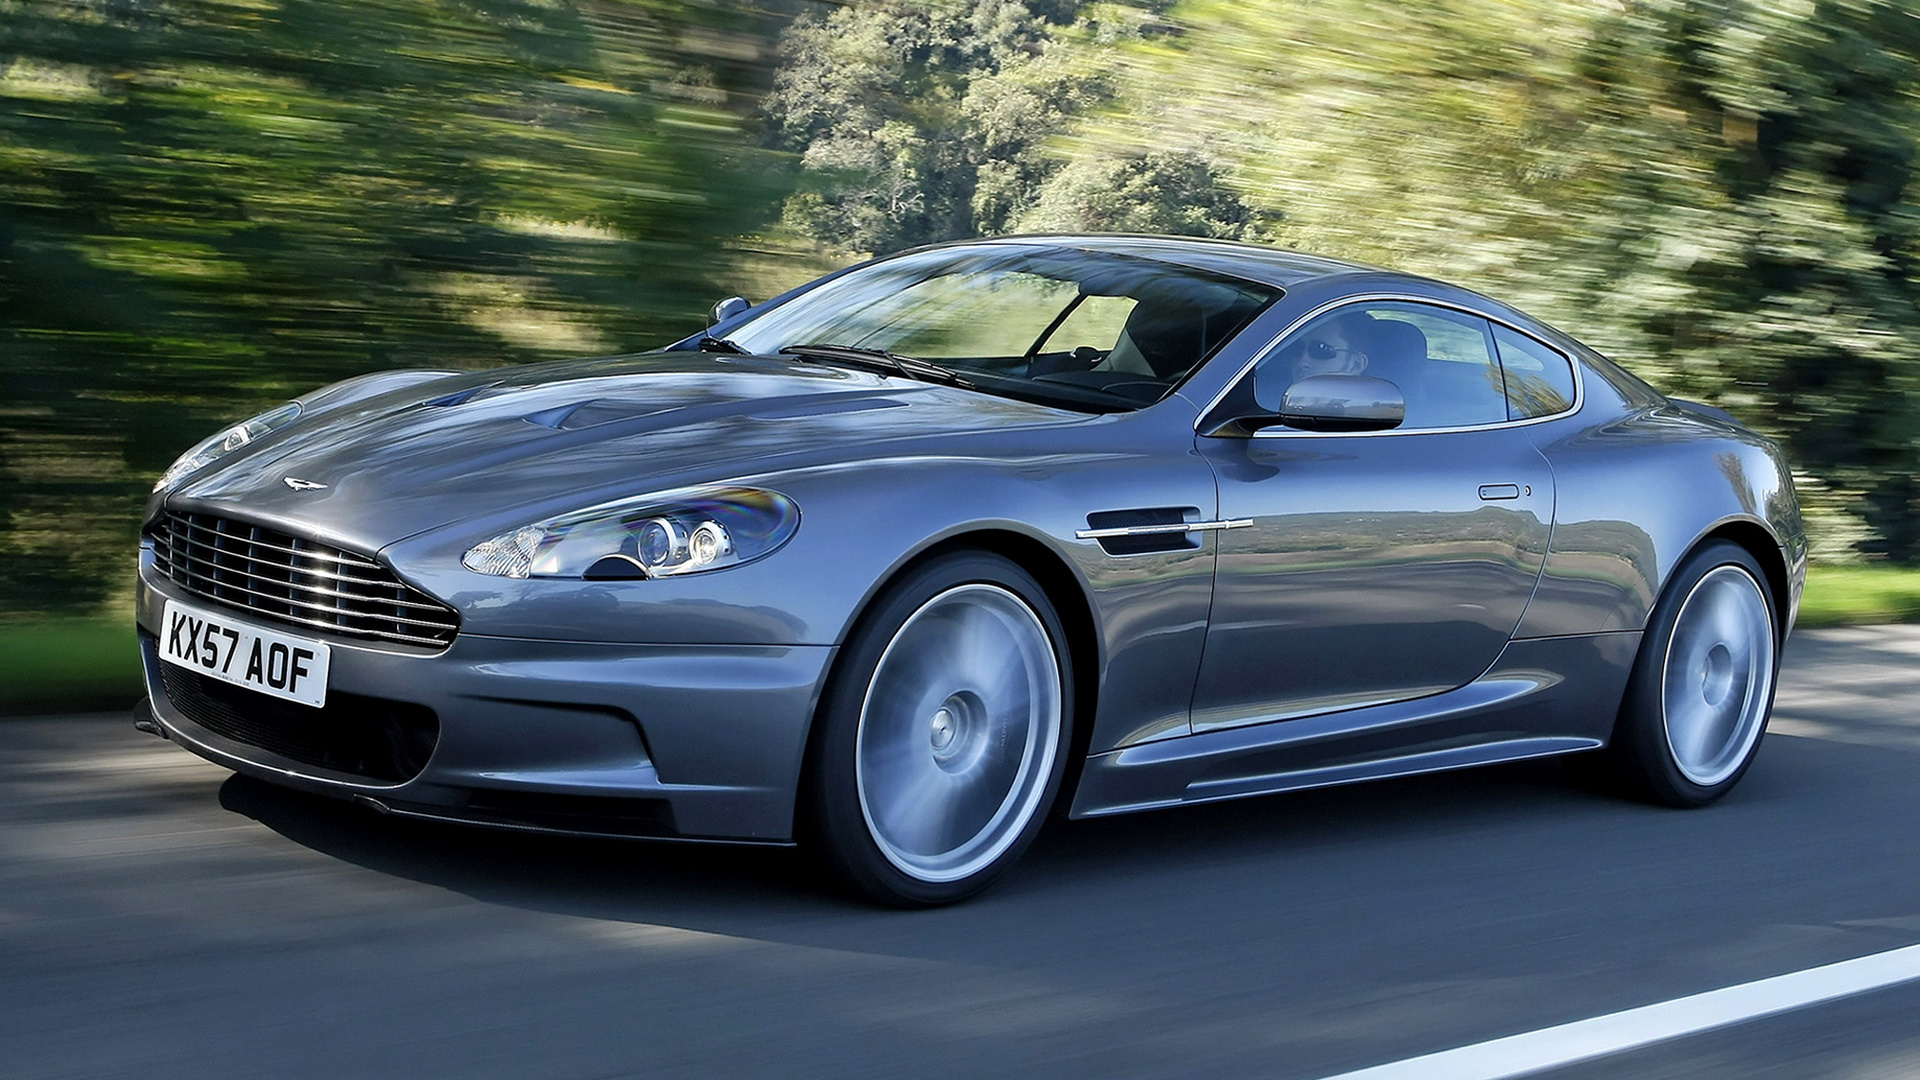 2007 Aston Martin DBS - Wallpapers and HD Images | Car Pixel